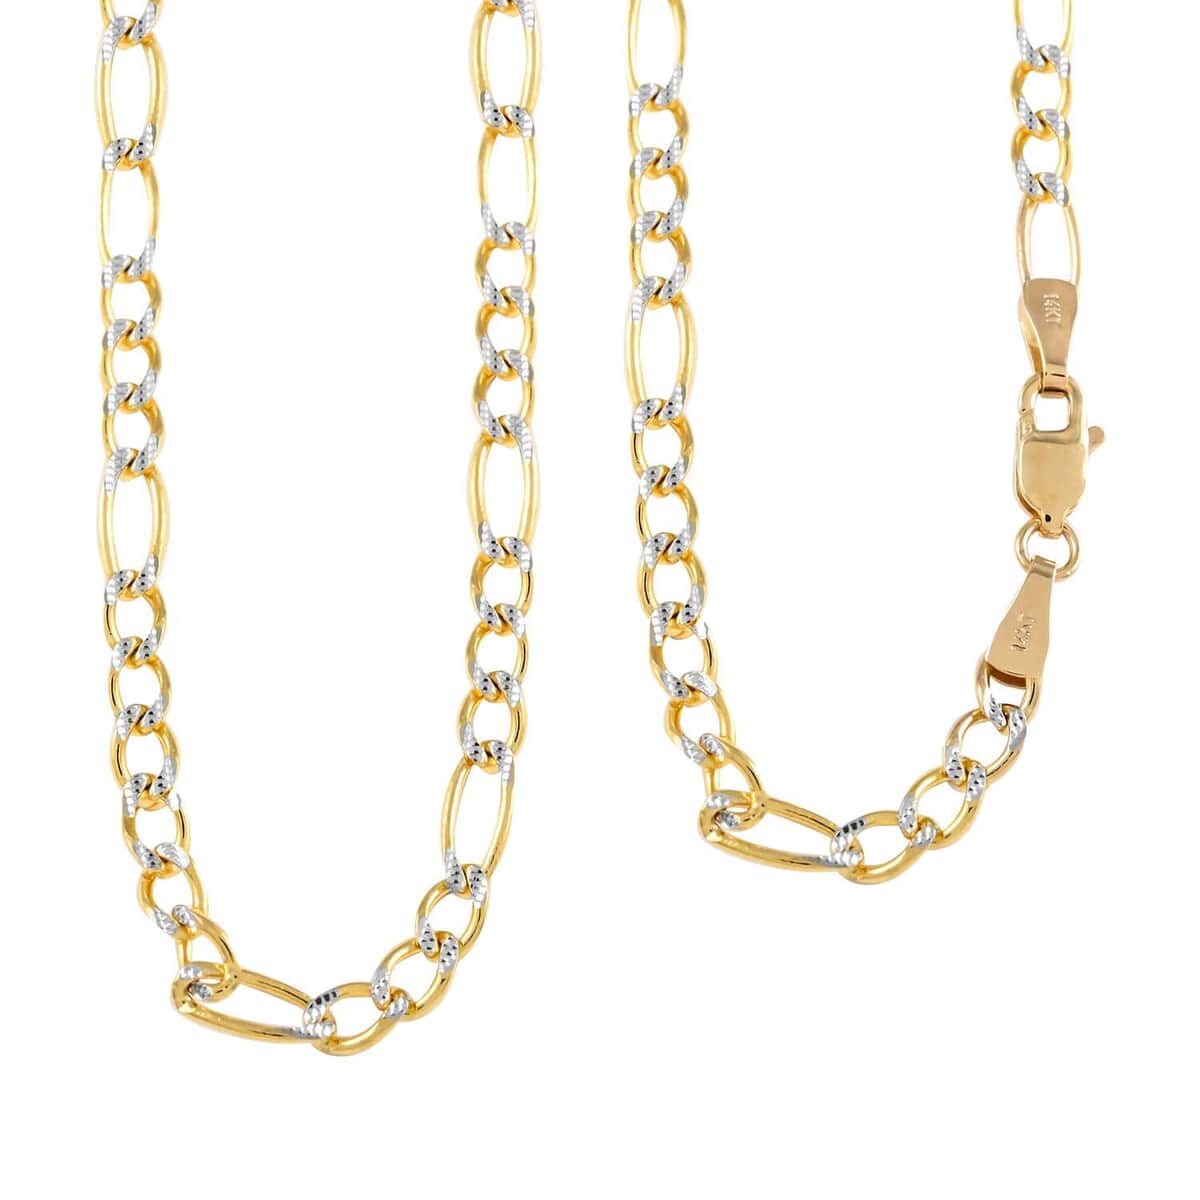 Maestro Gold Collection Italian 10K Yellow & White Gold Pave Figaro Necklace | Dual Tone Gold Figaro Chain Necklace | 18 Inches Chain Necklace | Gold Jewelry For Her 6.80 Grams image number 0